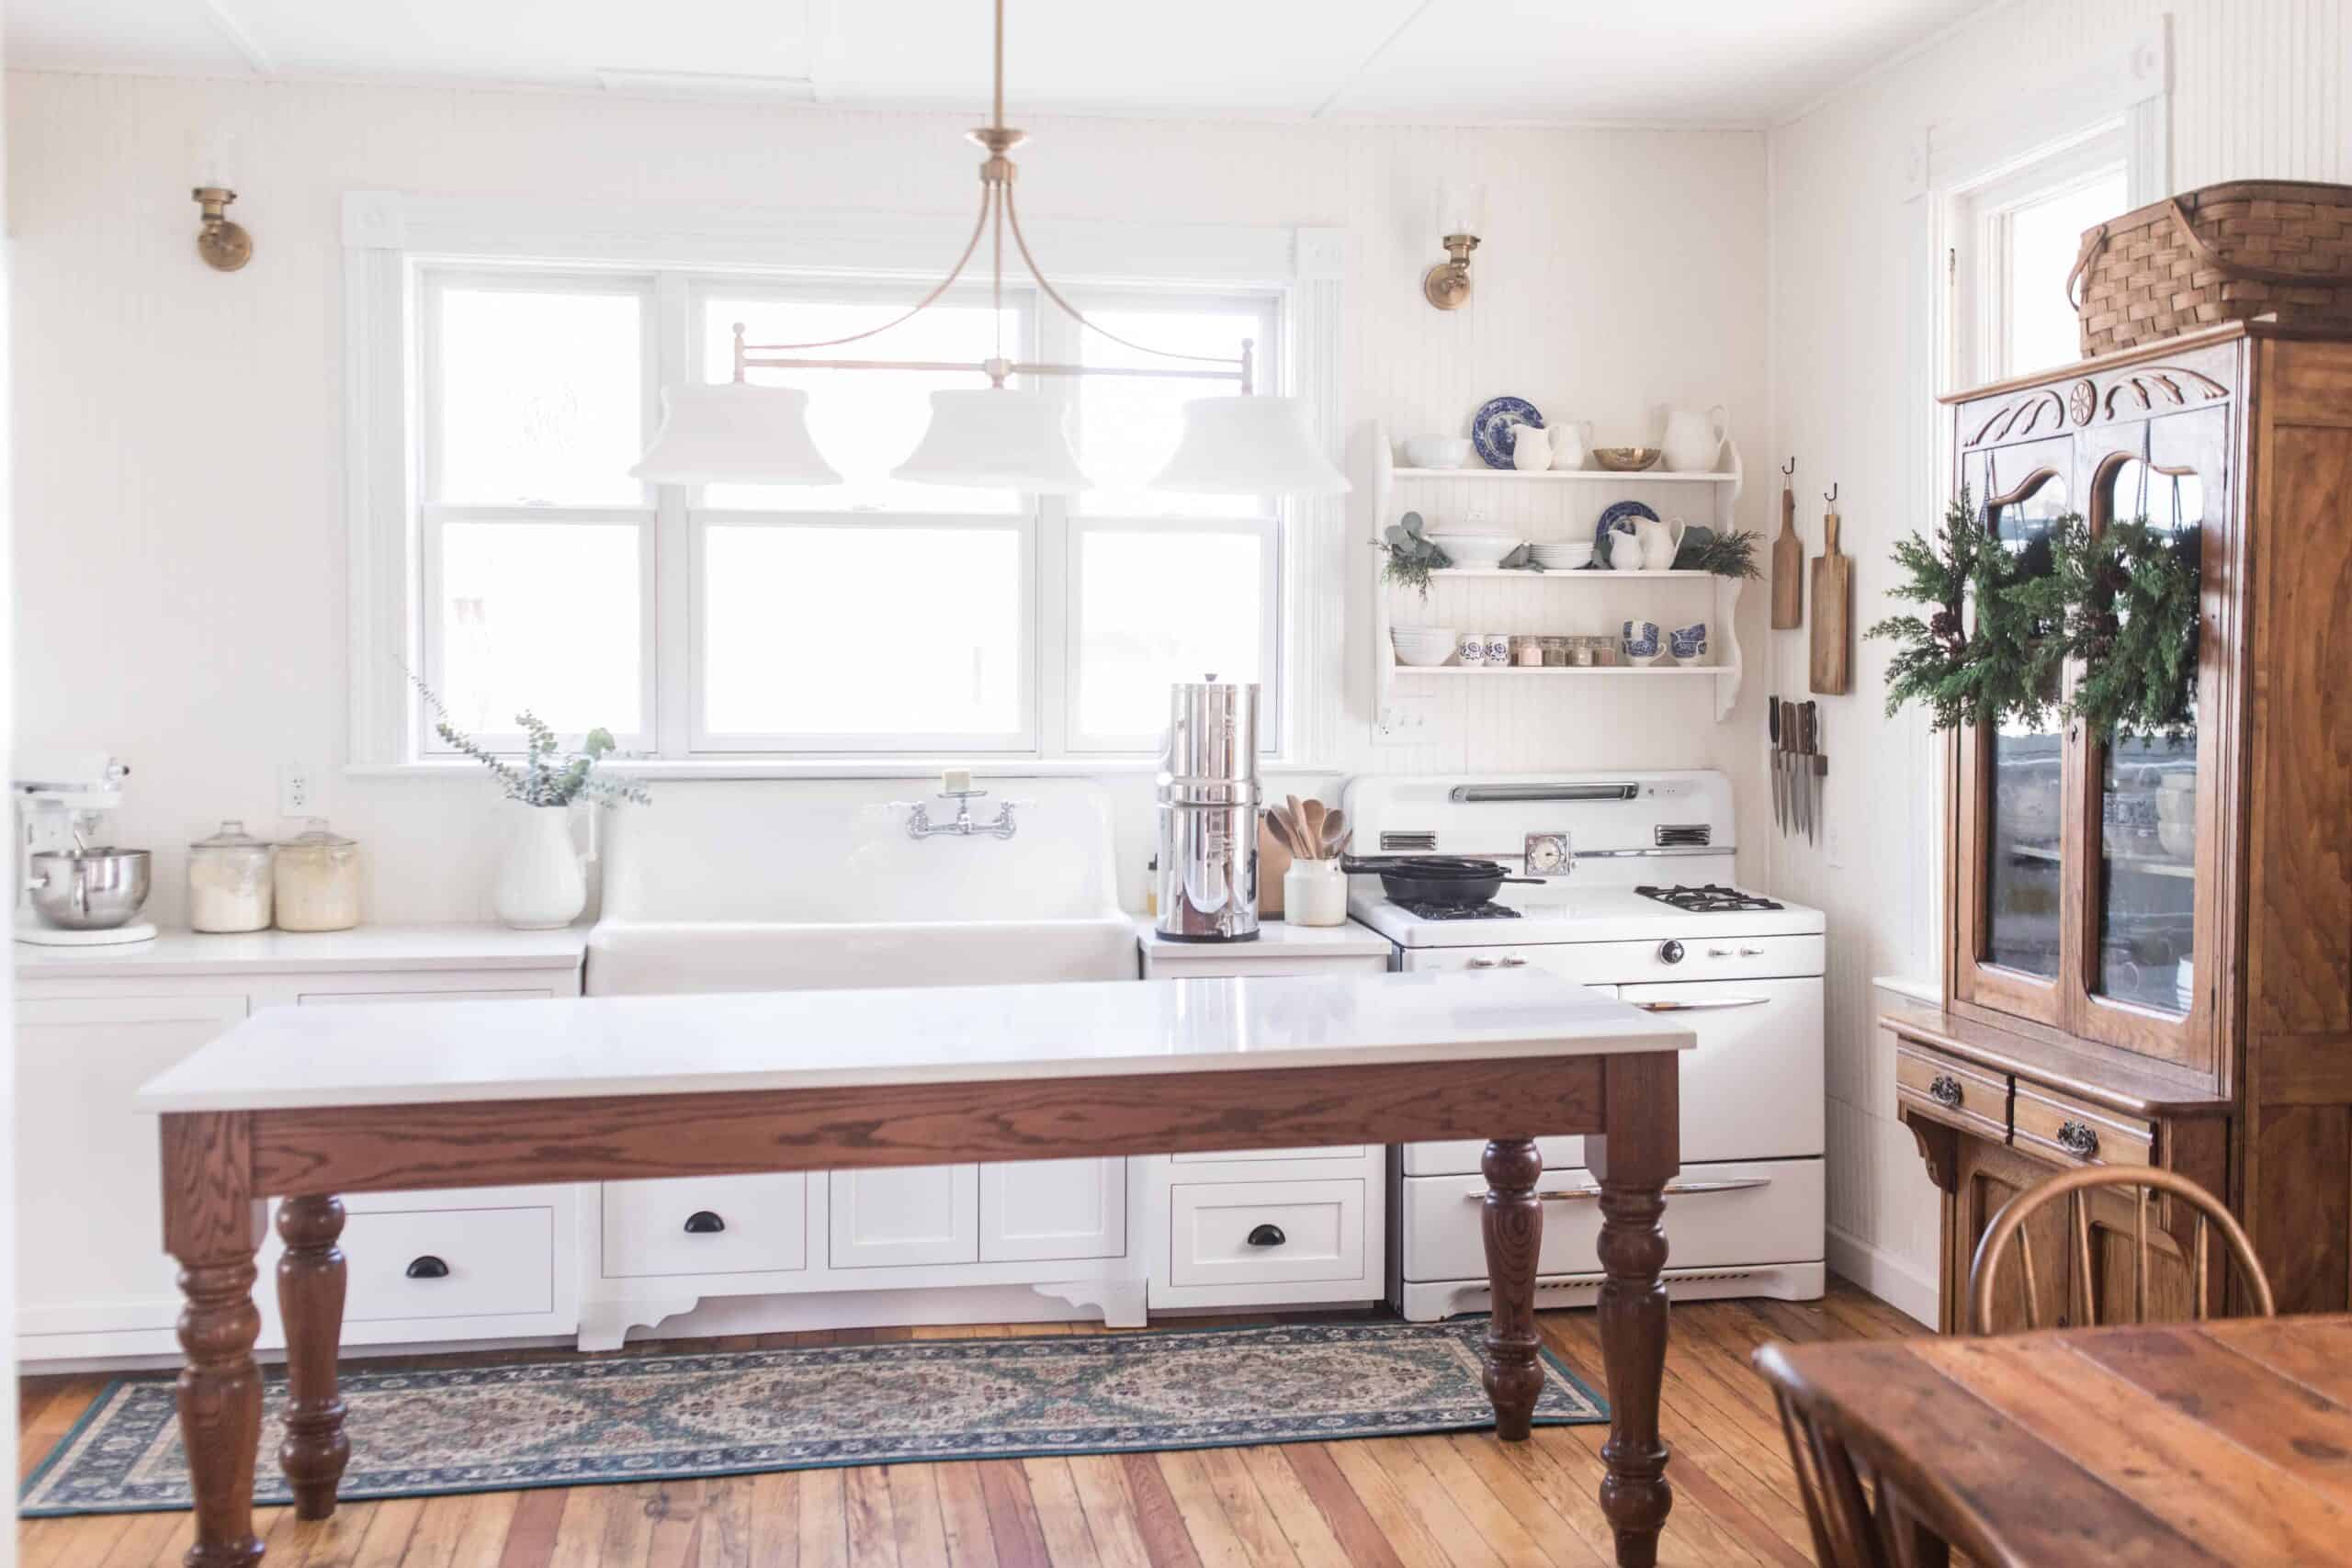 https://www.farmhouseonboone.com/wp-content/uploads/2020/01/victorian-farmhouse-kitchen-reveal-26-scaled.jpg